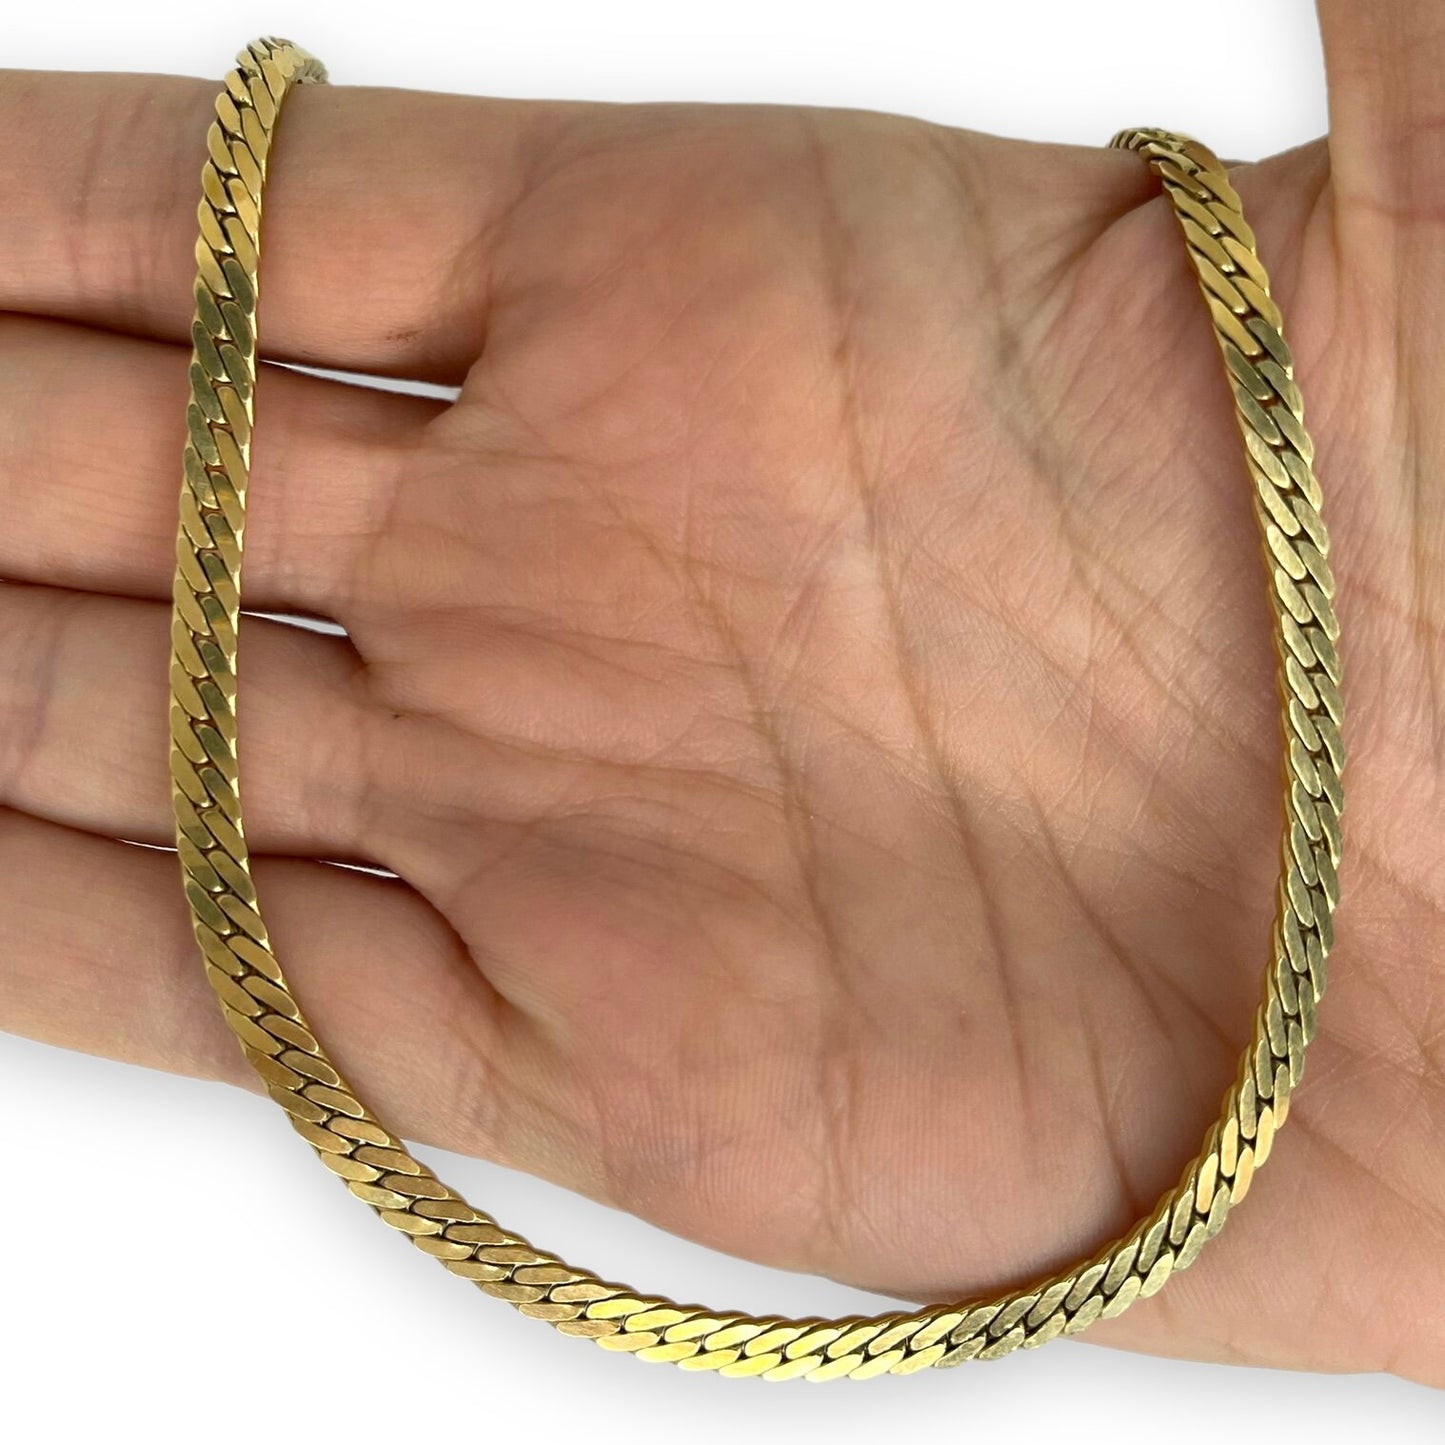 VINTAGE 14K CLOSED CURB-LINK GOLD CHAIN NECKLACE